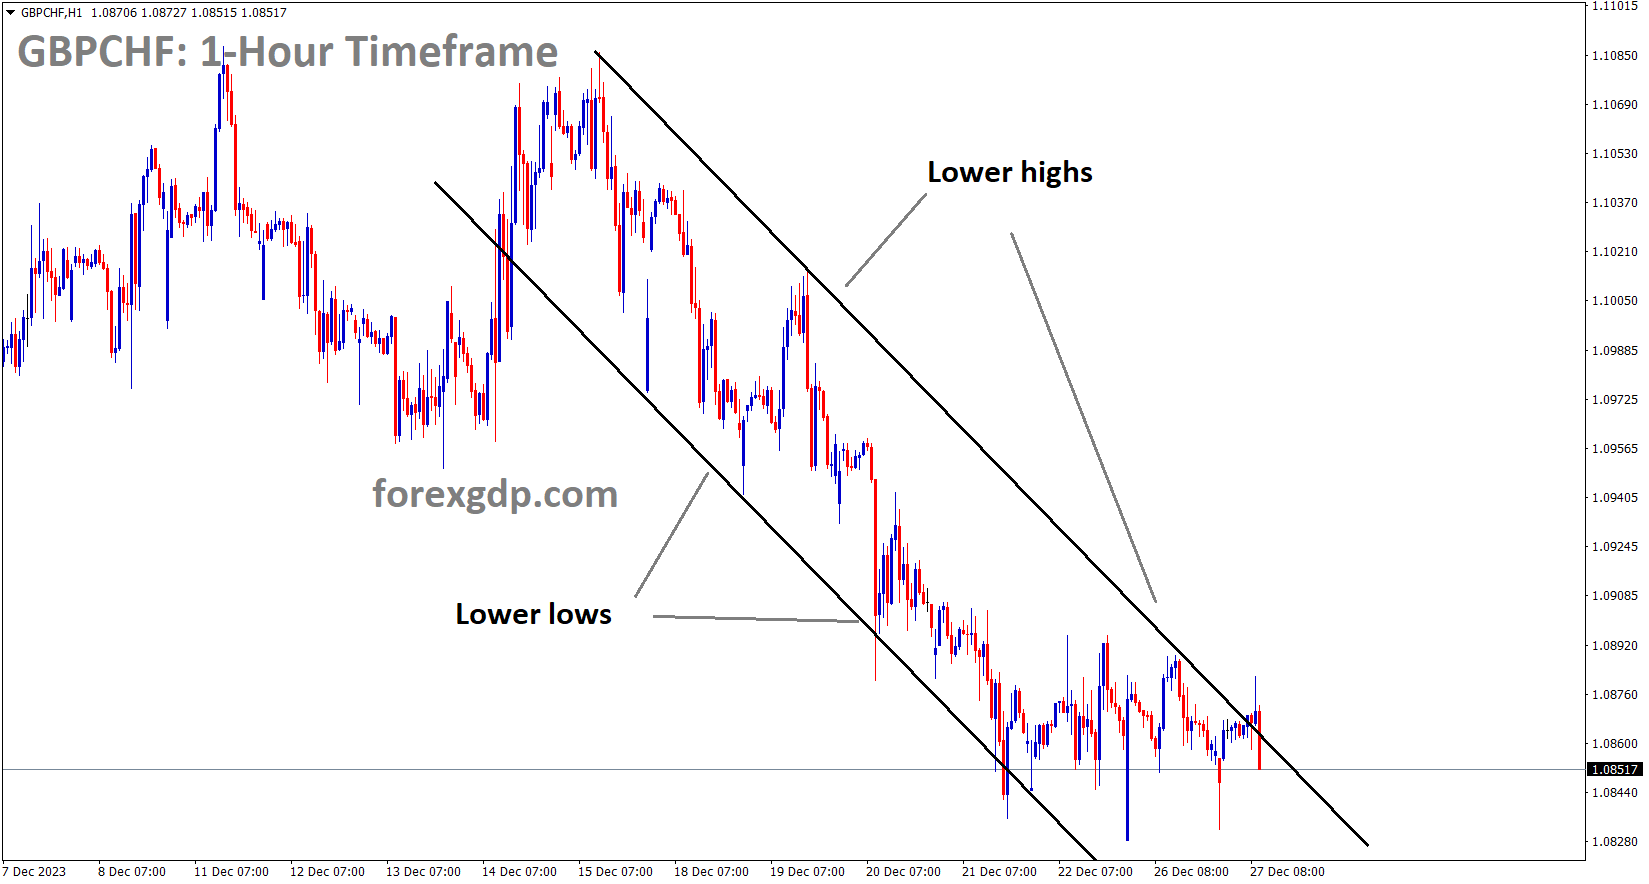 GBPCHF is moving in the Descending channel and the market has fallen from the lower high area of the channel